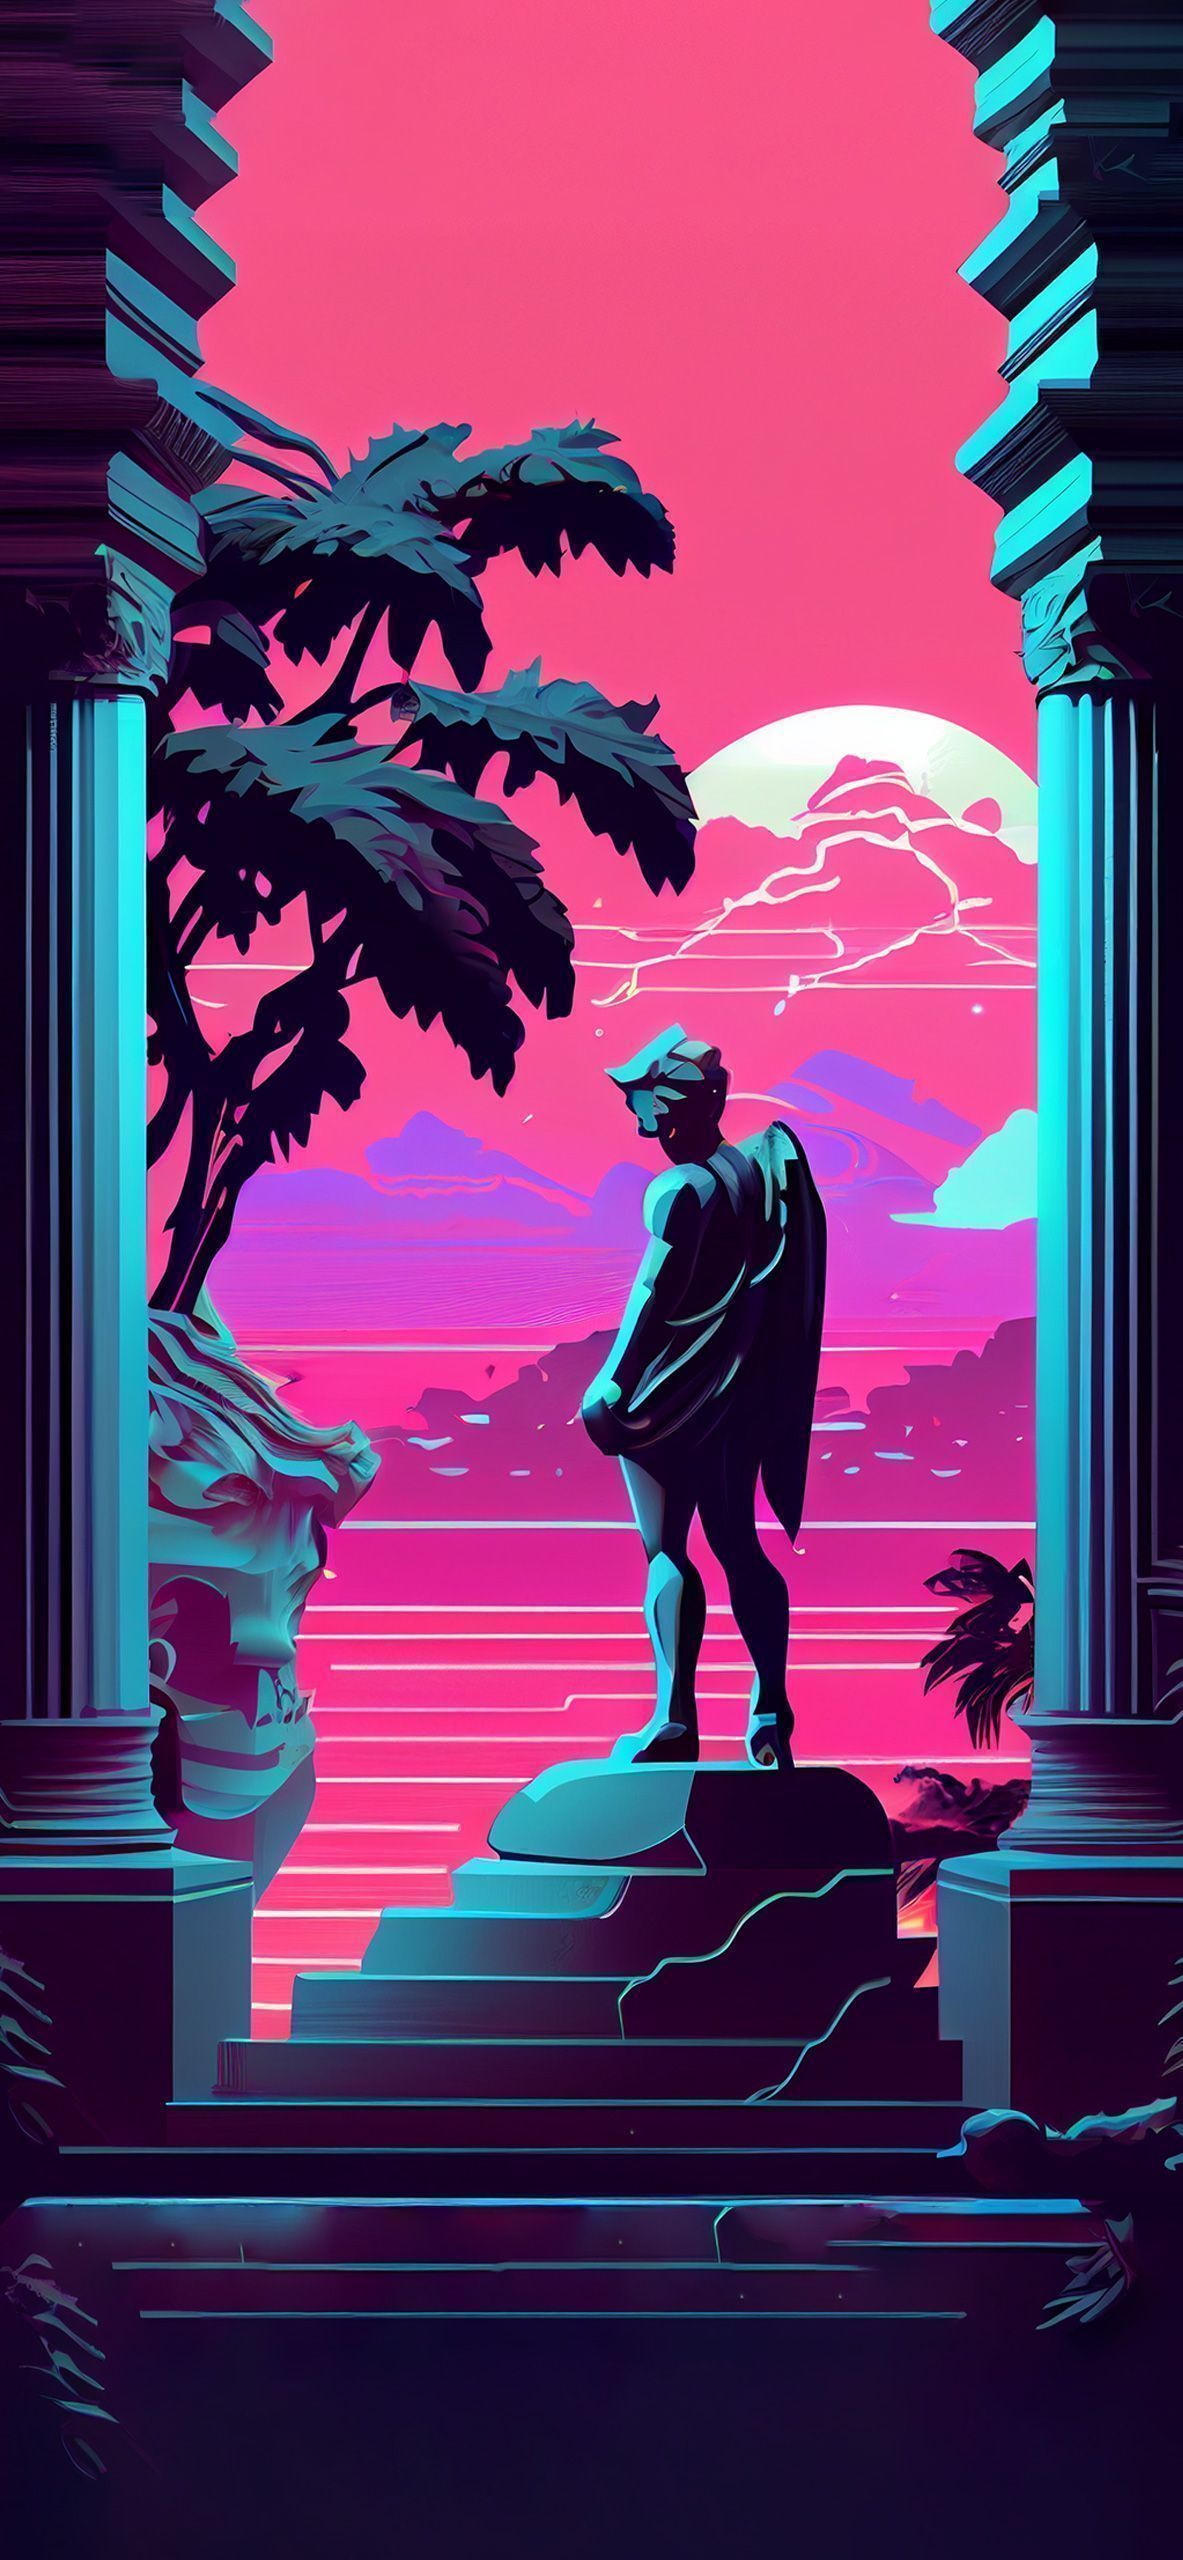 IPhone wallpaper of a statue in front of a pink sky - Statue, Greek statue, synthwave